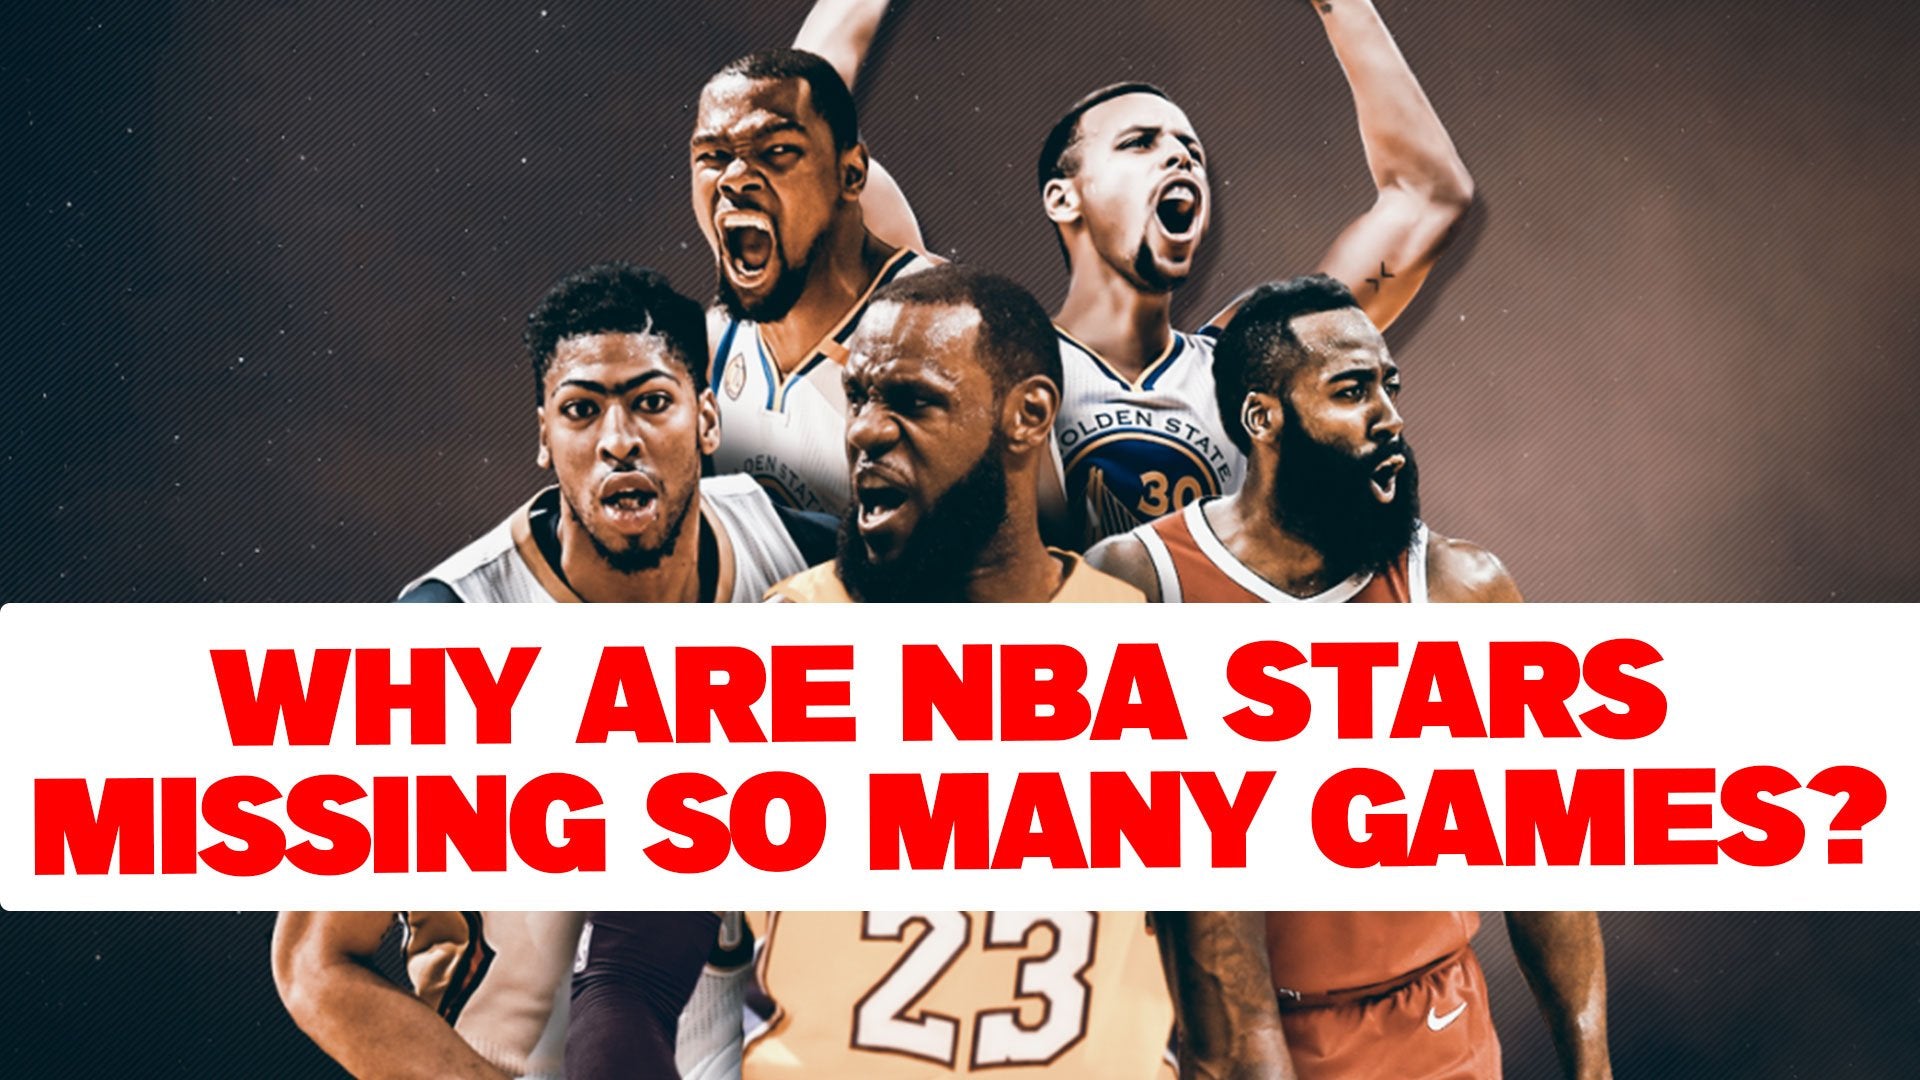 Why are NBA stars missing so many games?